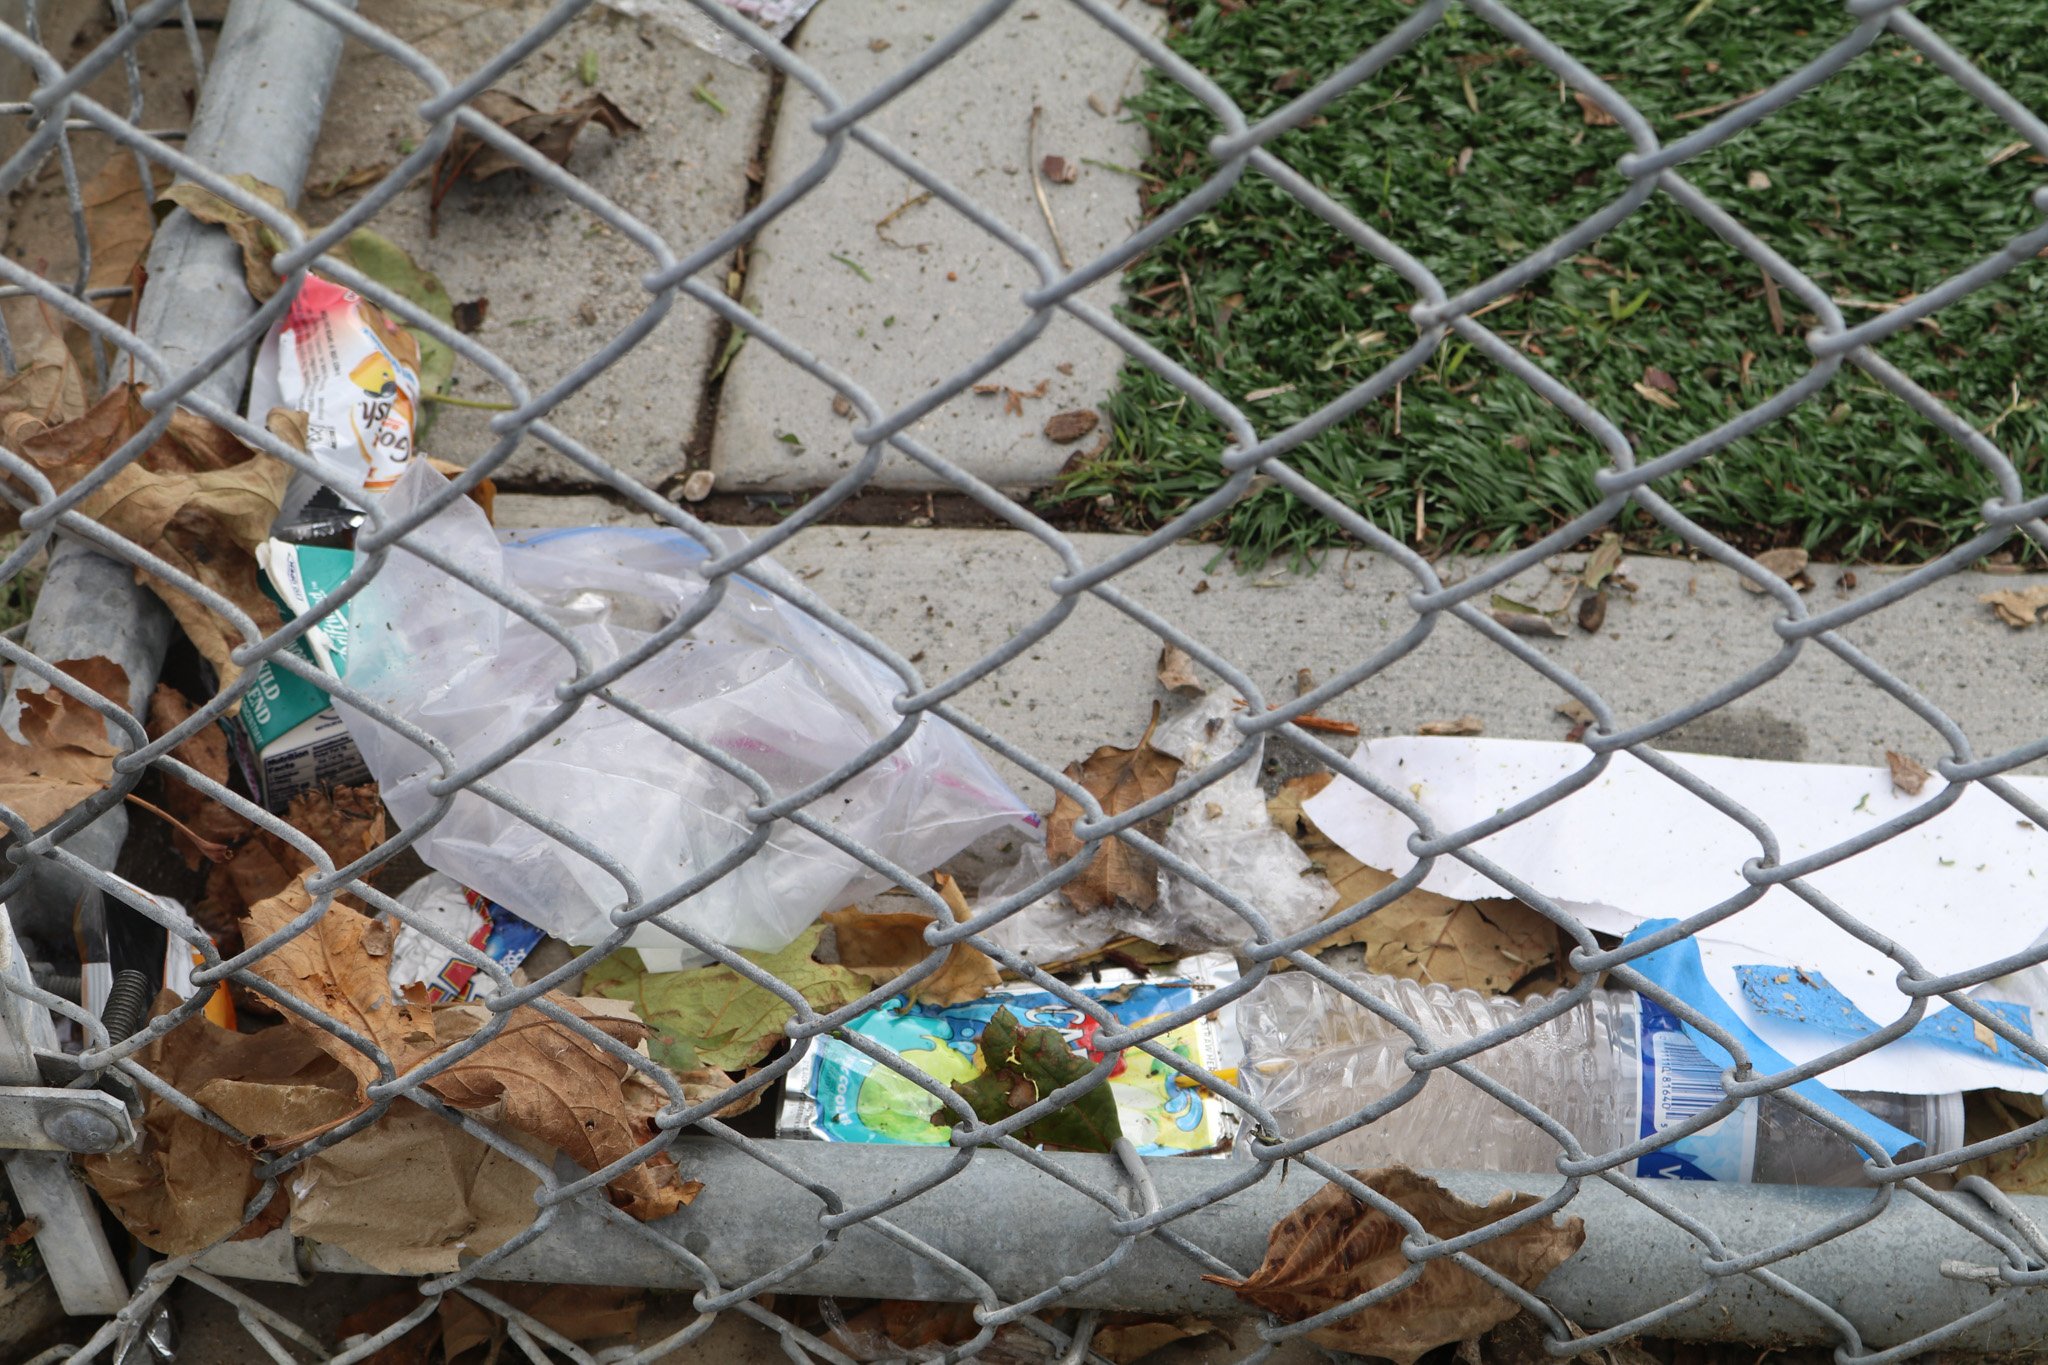  A pile of trash outside of John Adams Middle School in Santa Monica, Calif. on March 23, 2023.  (Photo: Presley Alexander/The Corsair) 